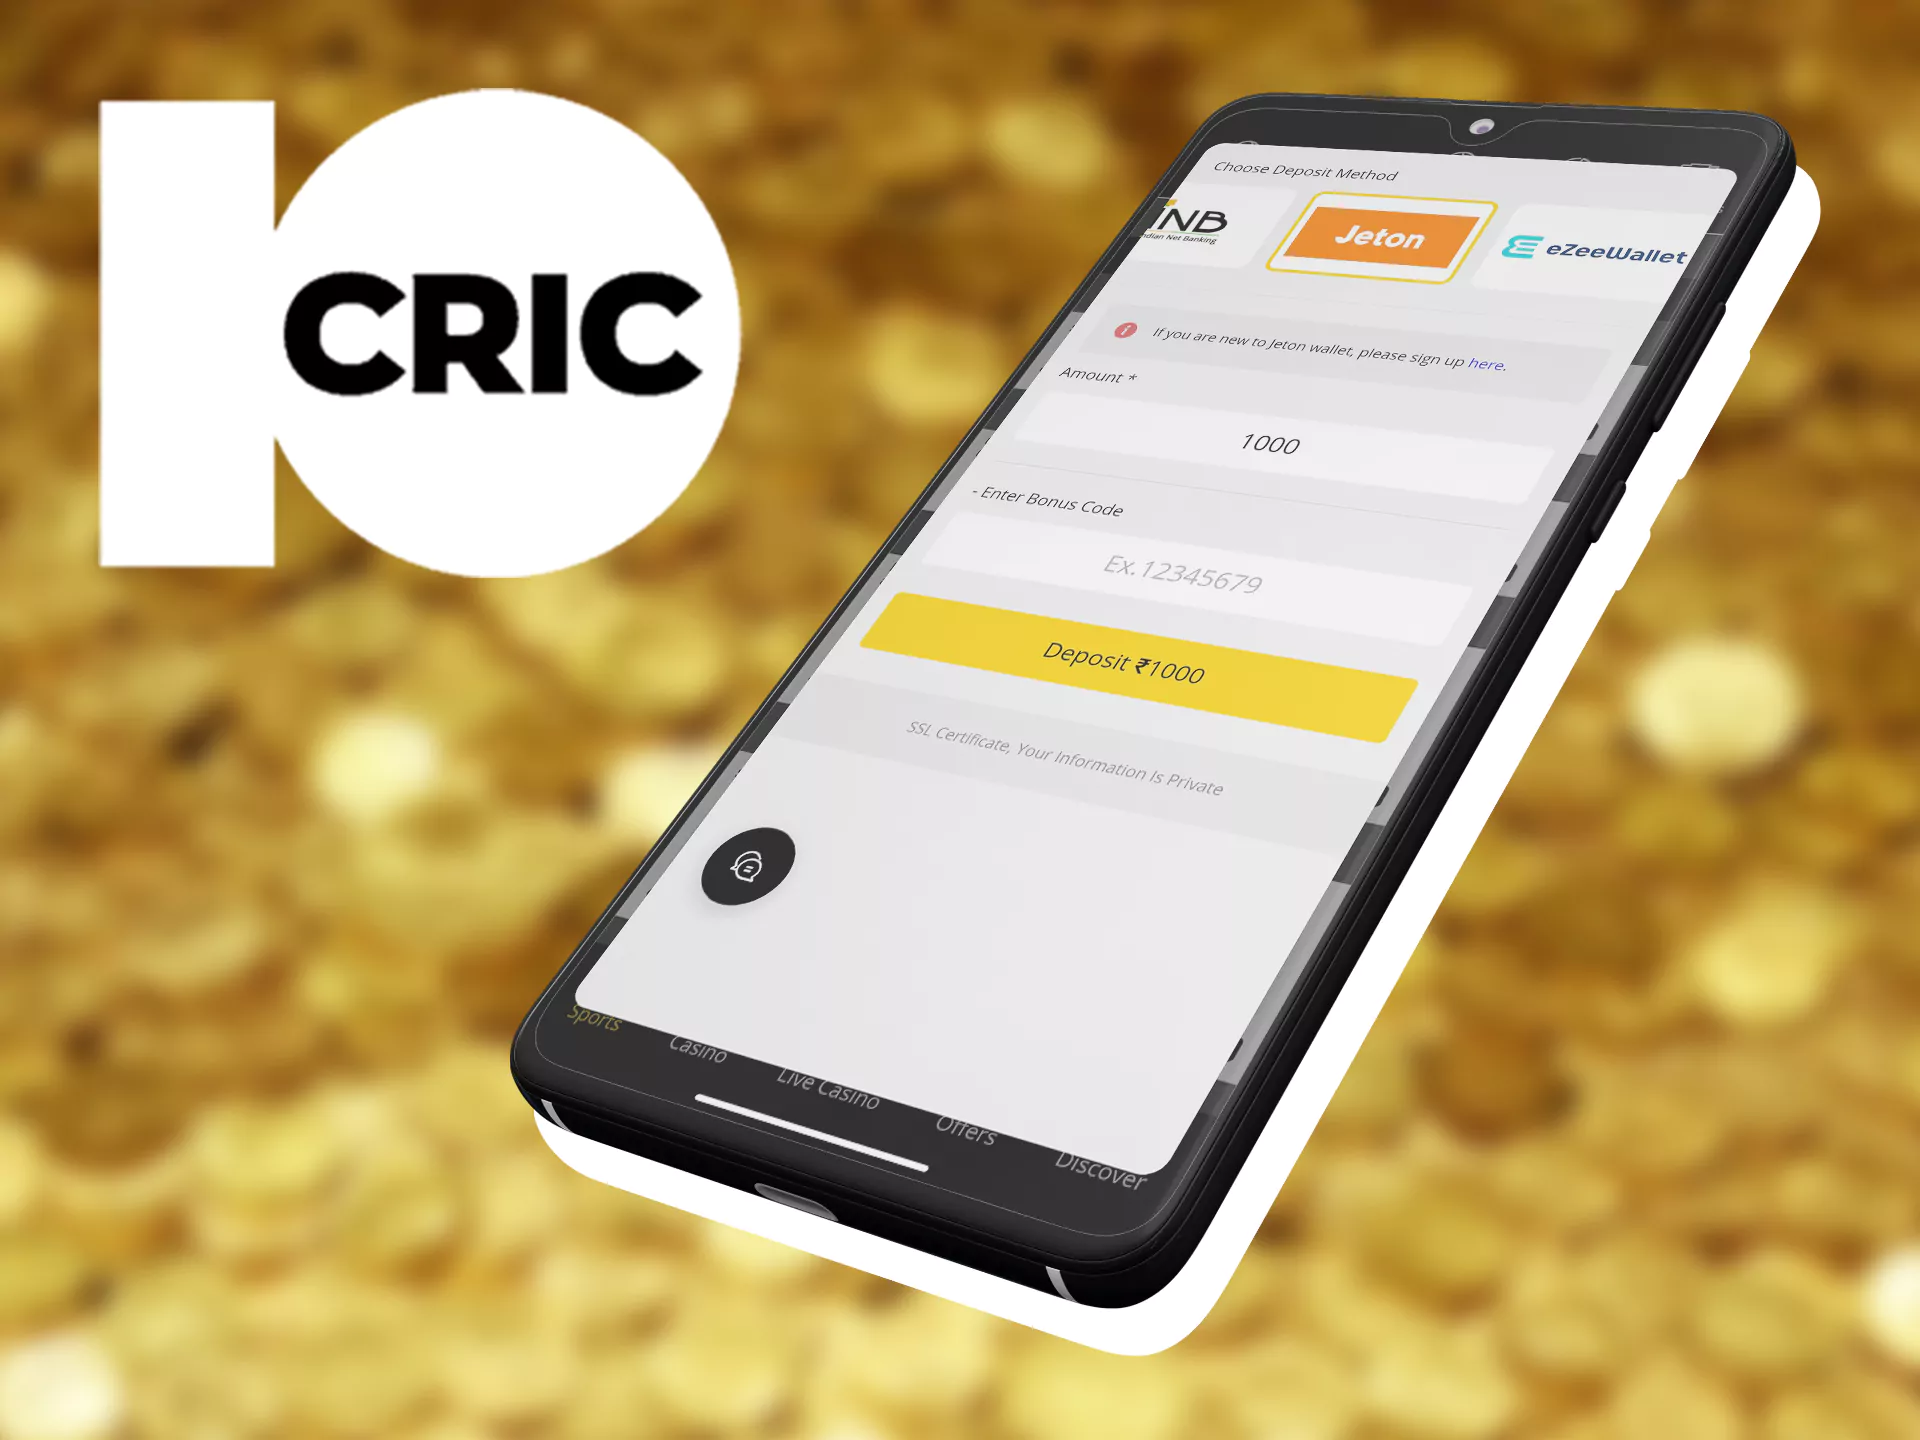 Through the 10Cric app, users can receive bonuses.